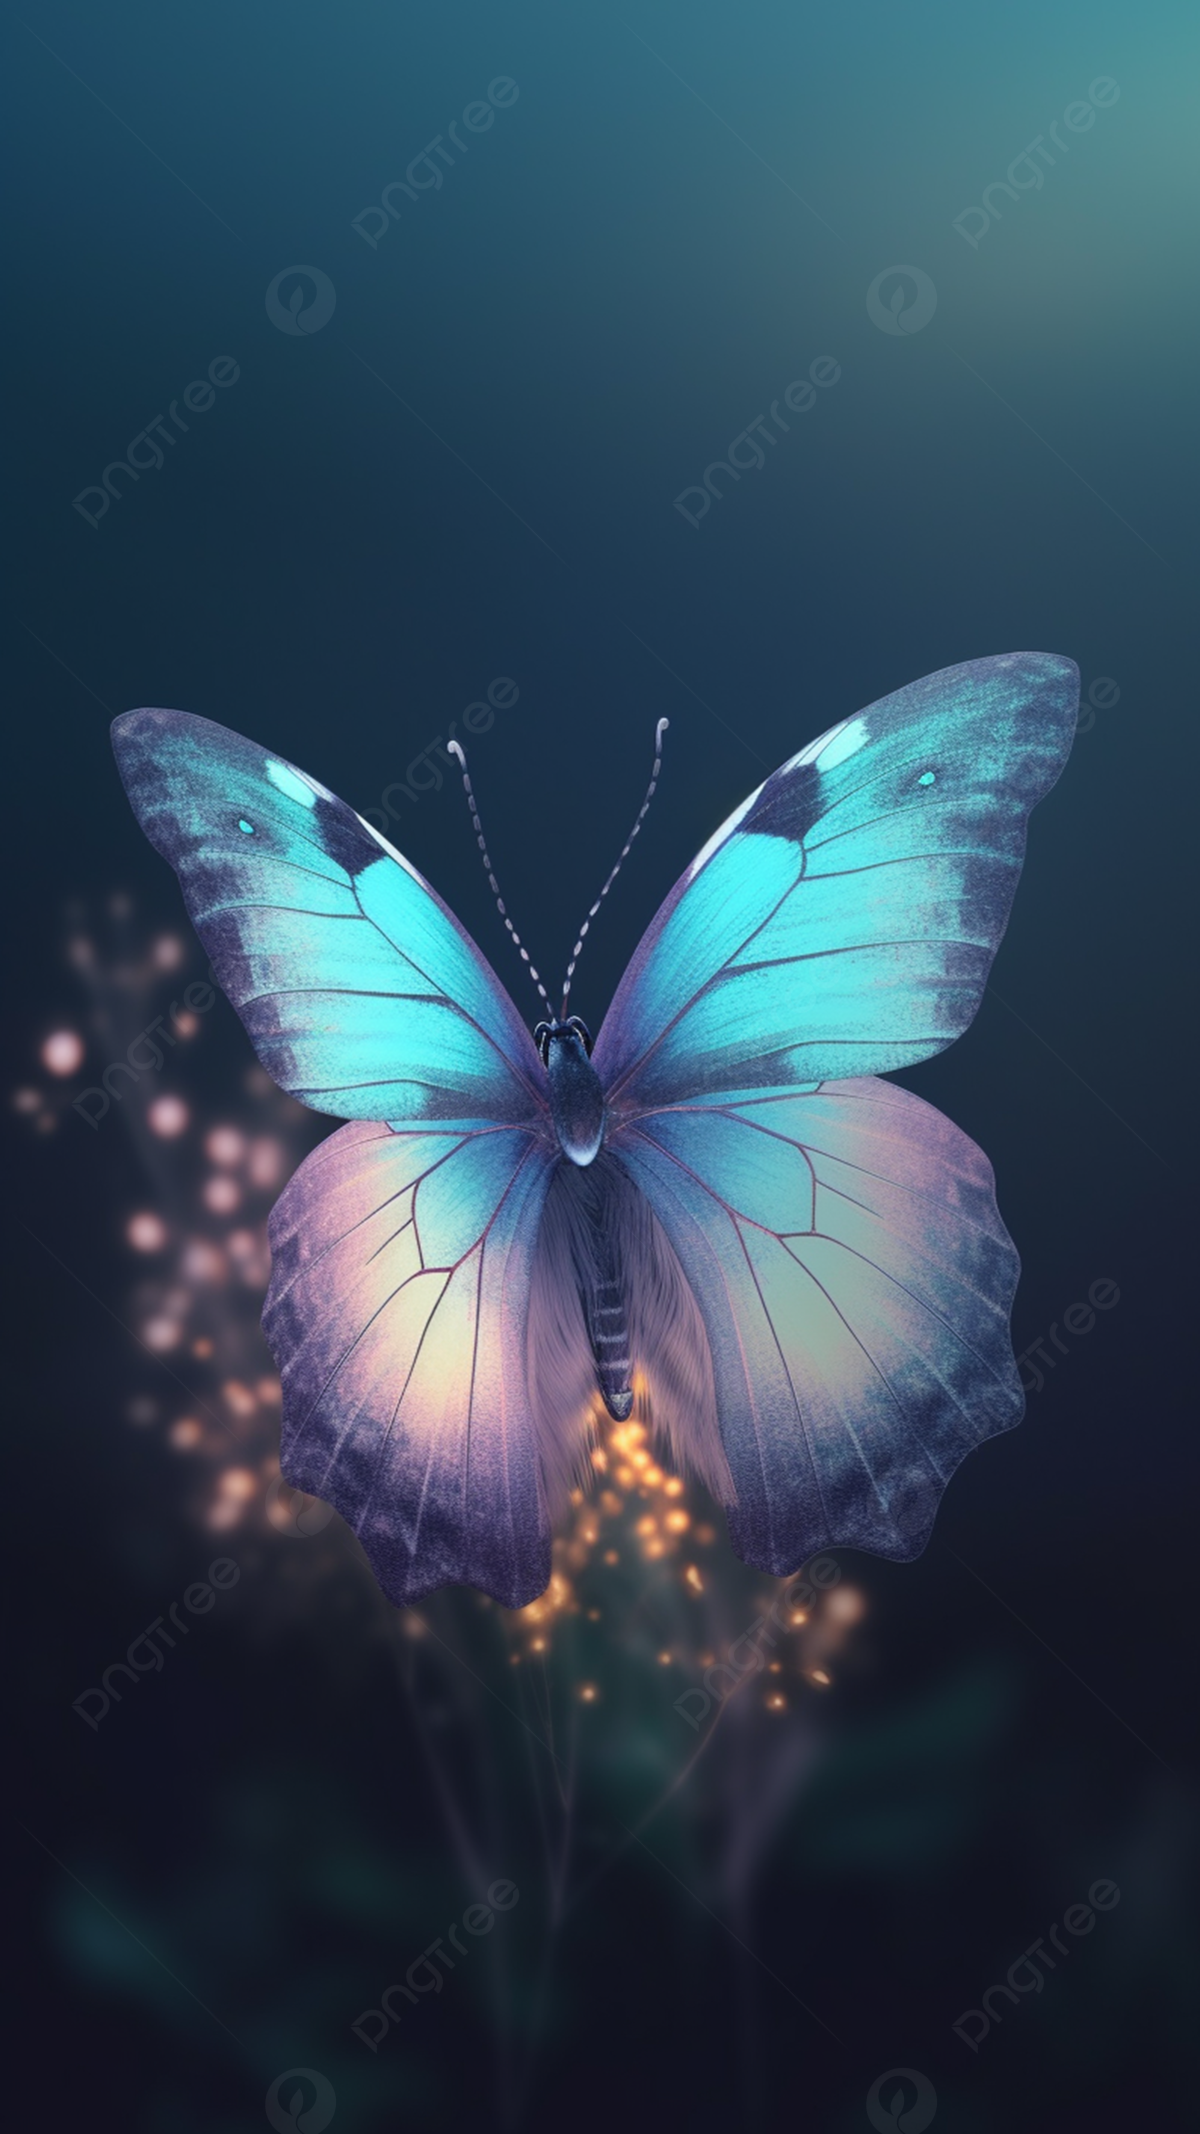 Butterfly Blue Simple Background Wallpaper Image For Free Download